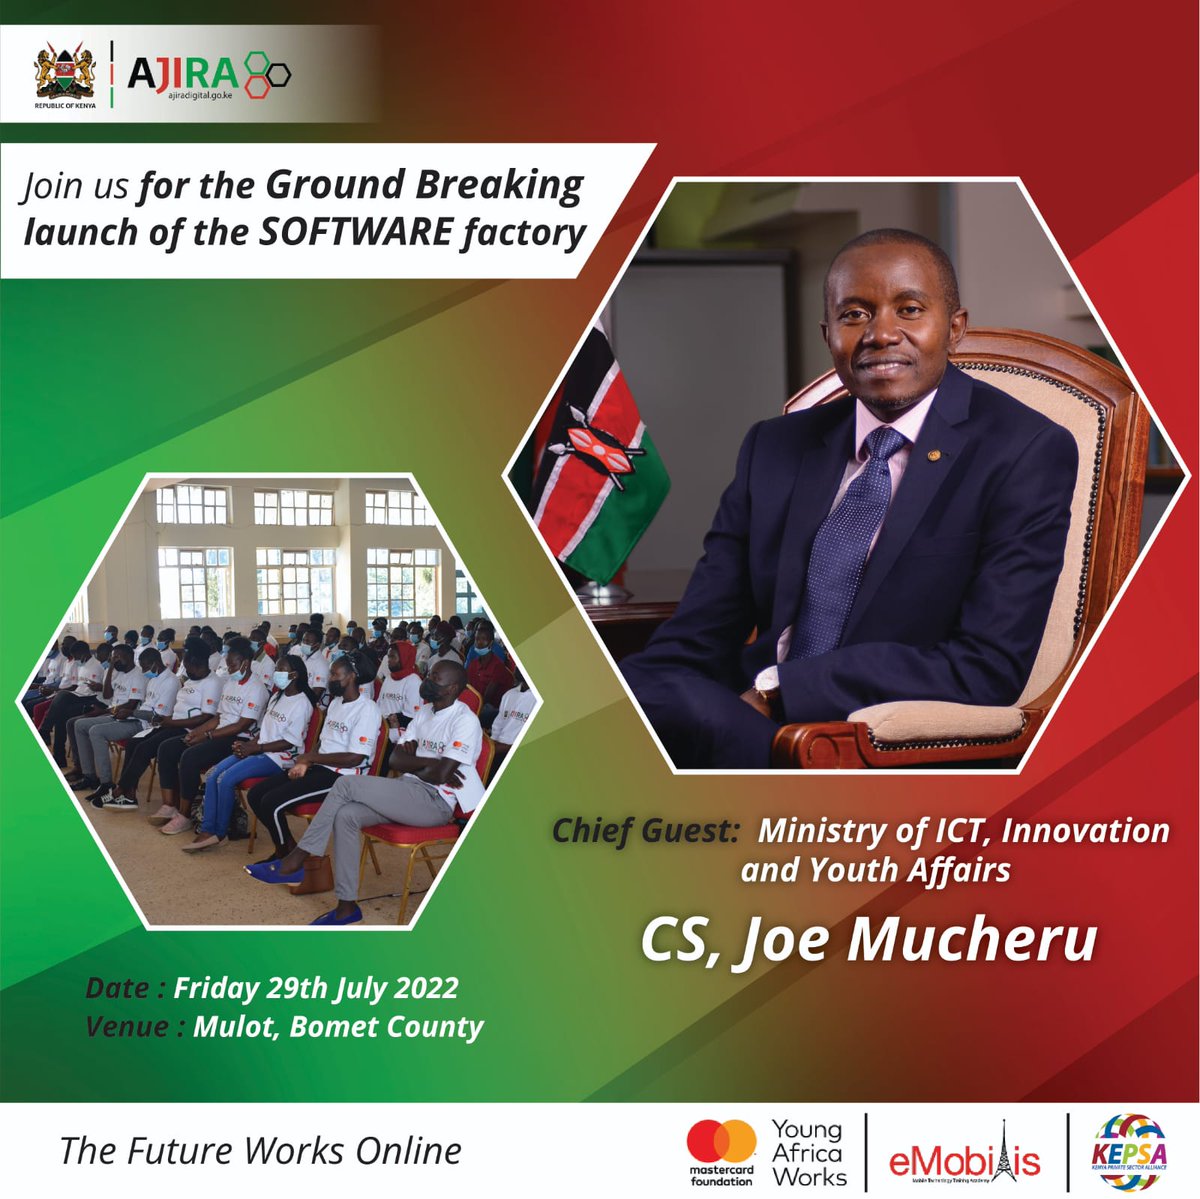 Bomet county, it is your turn for something big! The ground-breaking launch of a Software factory happening today will provide an environment for innovation and creativity for the youth. #TheFutureWorksOnline #AjiraMashinani